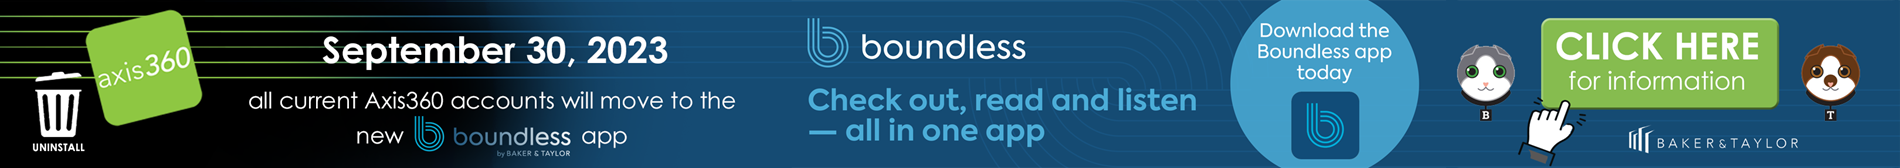 All Axis360 accounts will move to the new boundless app by Baker & Taylor on September 30, 2023. Click here for more information